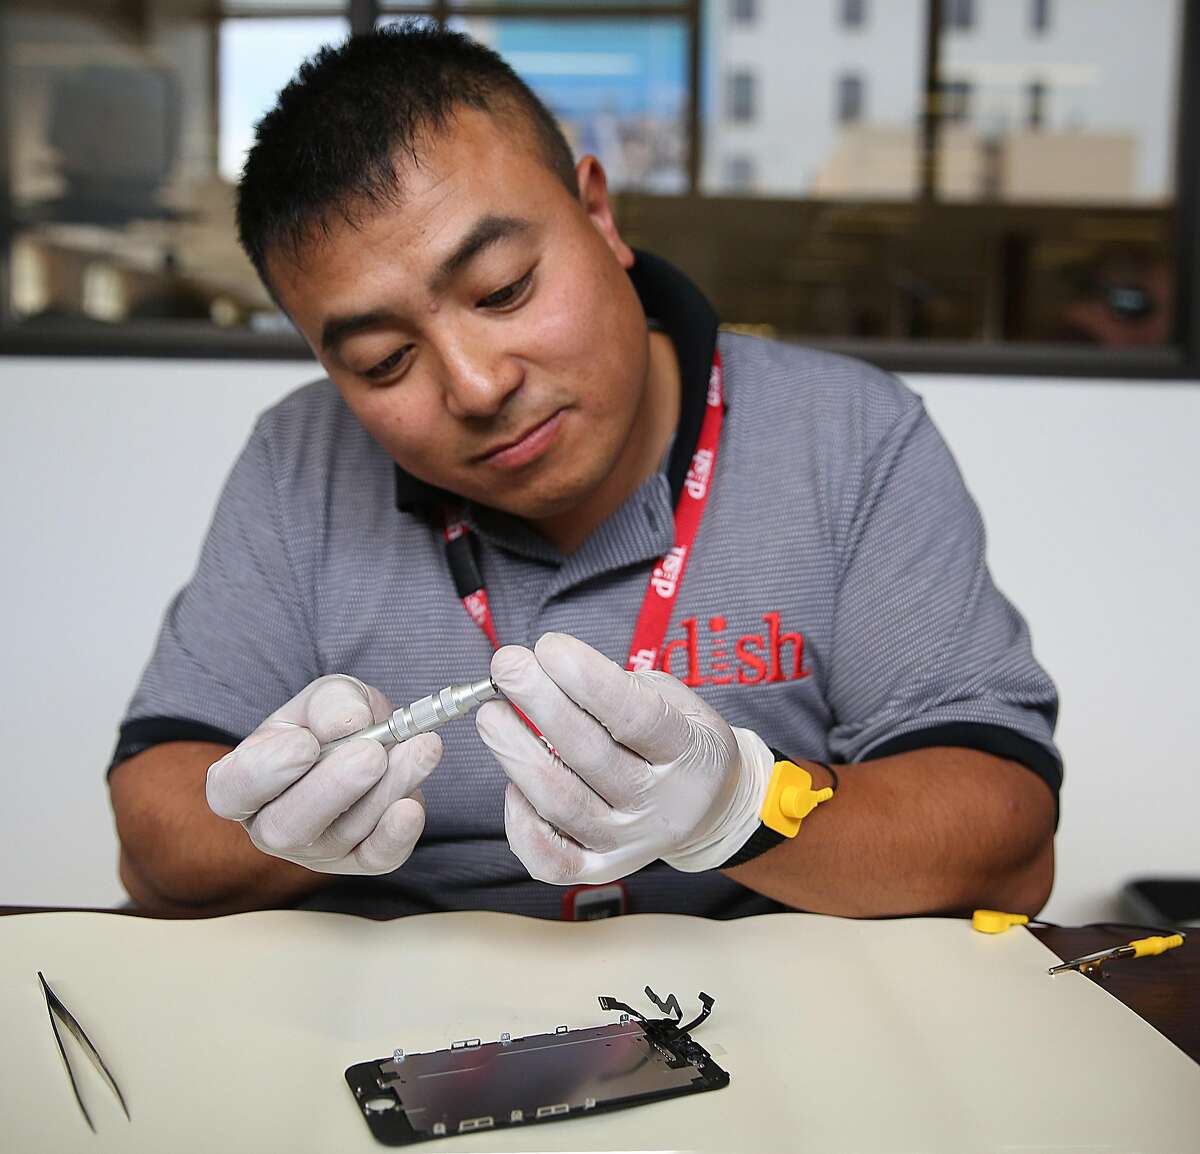 Dish employee Johnson Chuong takes apart an iPhone to fix a cracked screen on site in the Chronicle building.